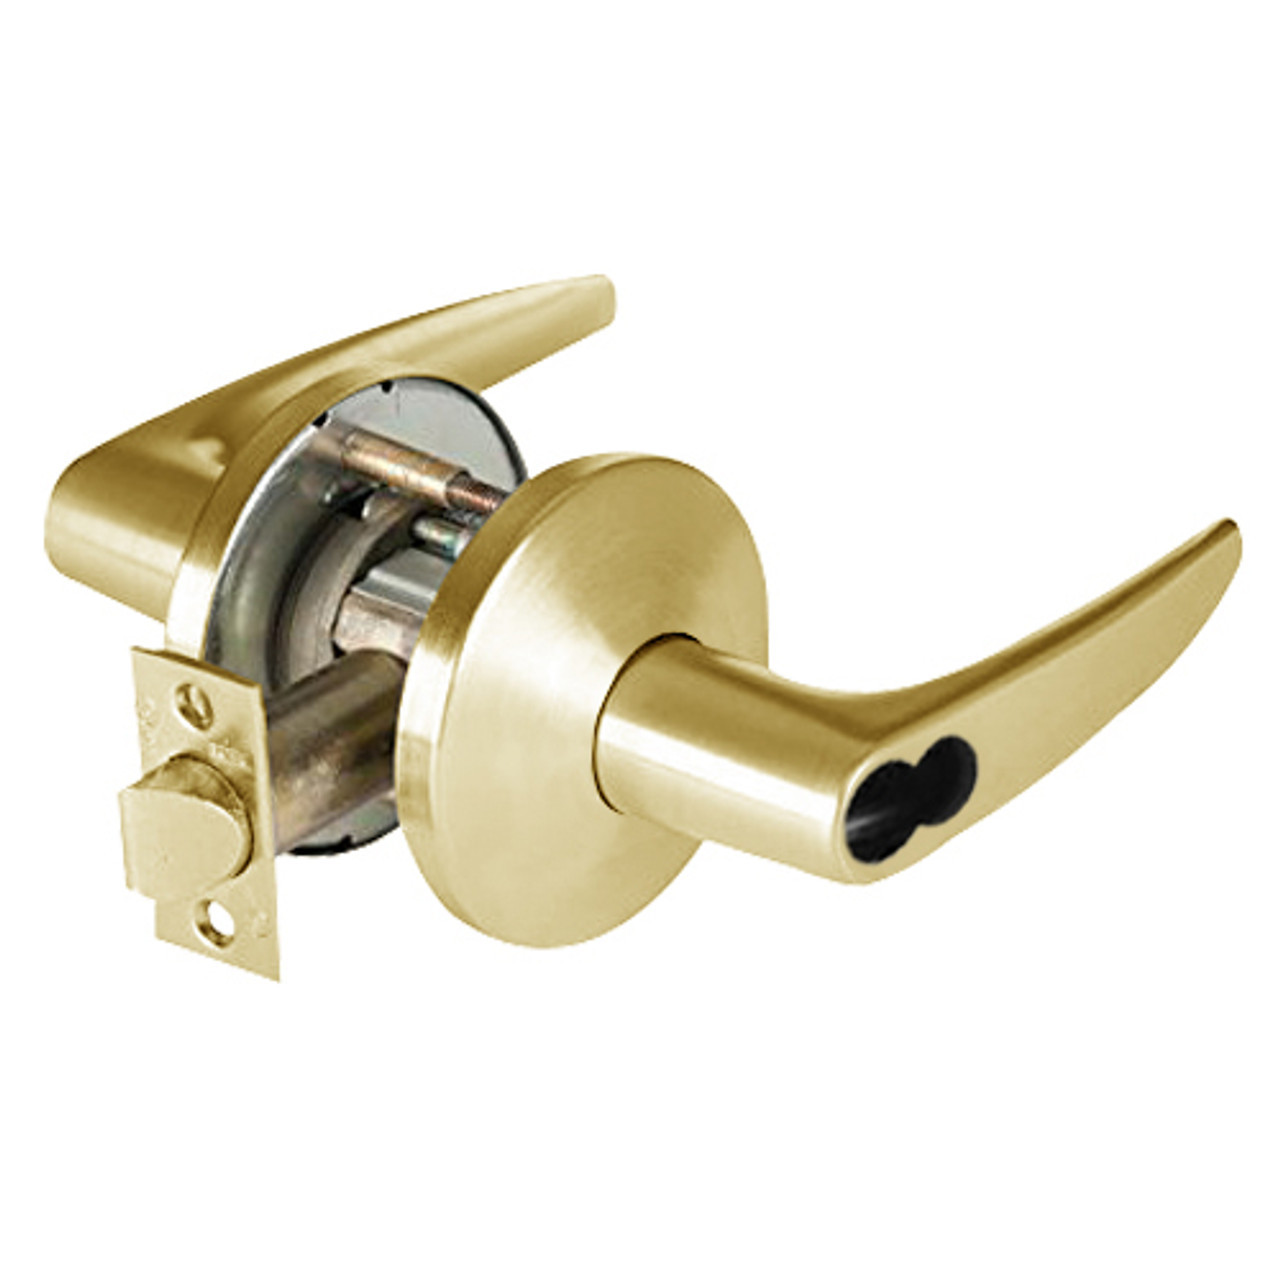 9K37A16LSTK605LM Best 9K Series Dormitory or Storeroom Cylindrical Lever Locks with Curved without Return Lever Design Accept 7 Pin Best Core in Bright Brass